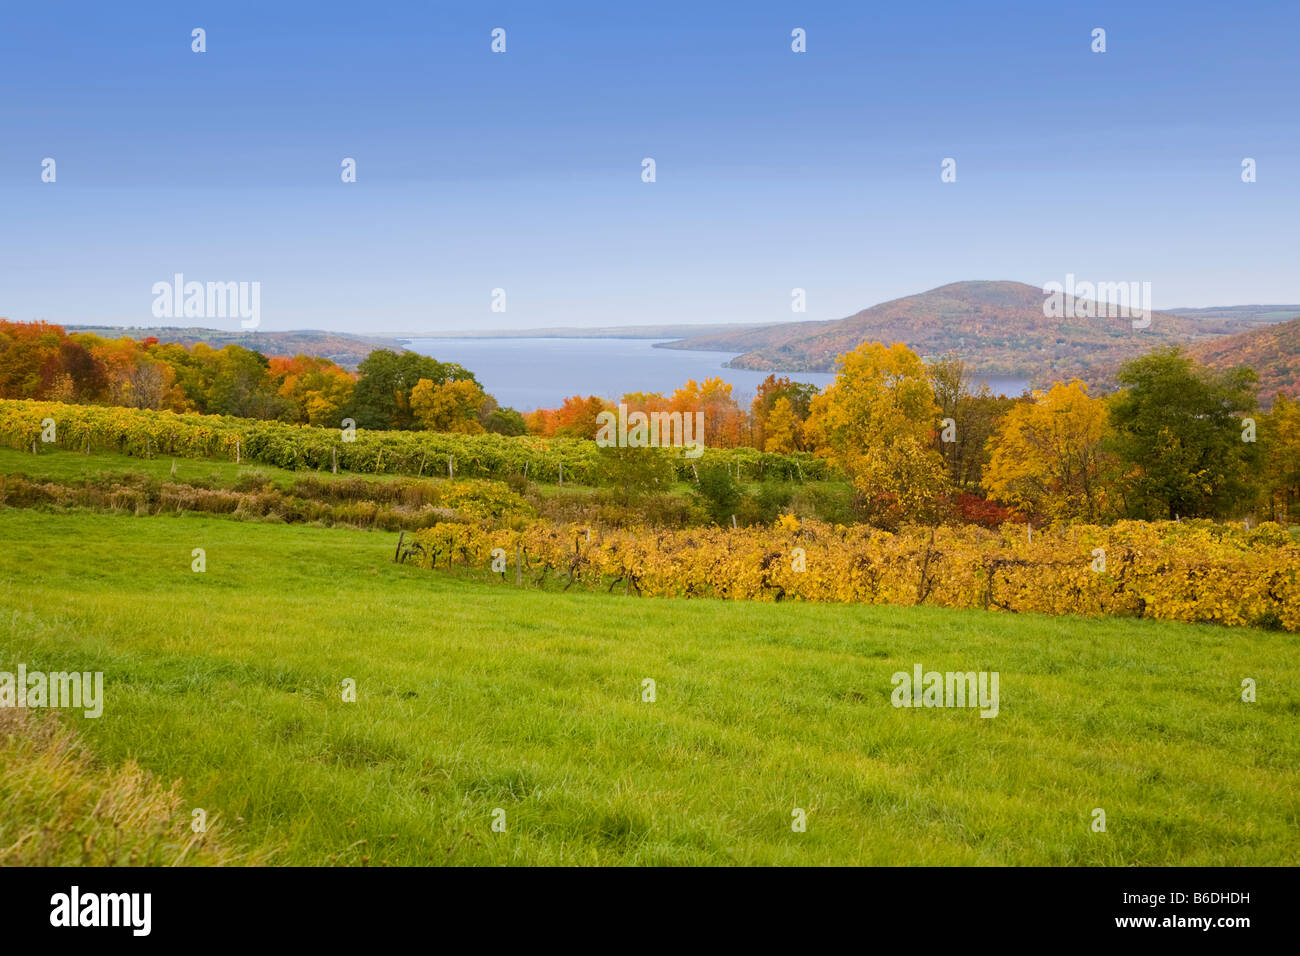 Fall vineyards with Canandaigua Lake in the Finger Lakes region of New York State in the background Stock Photo